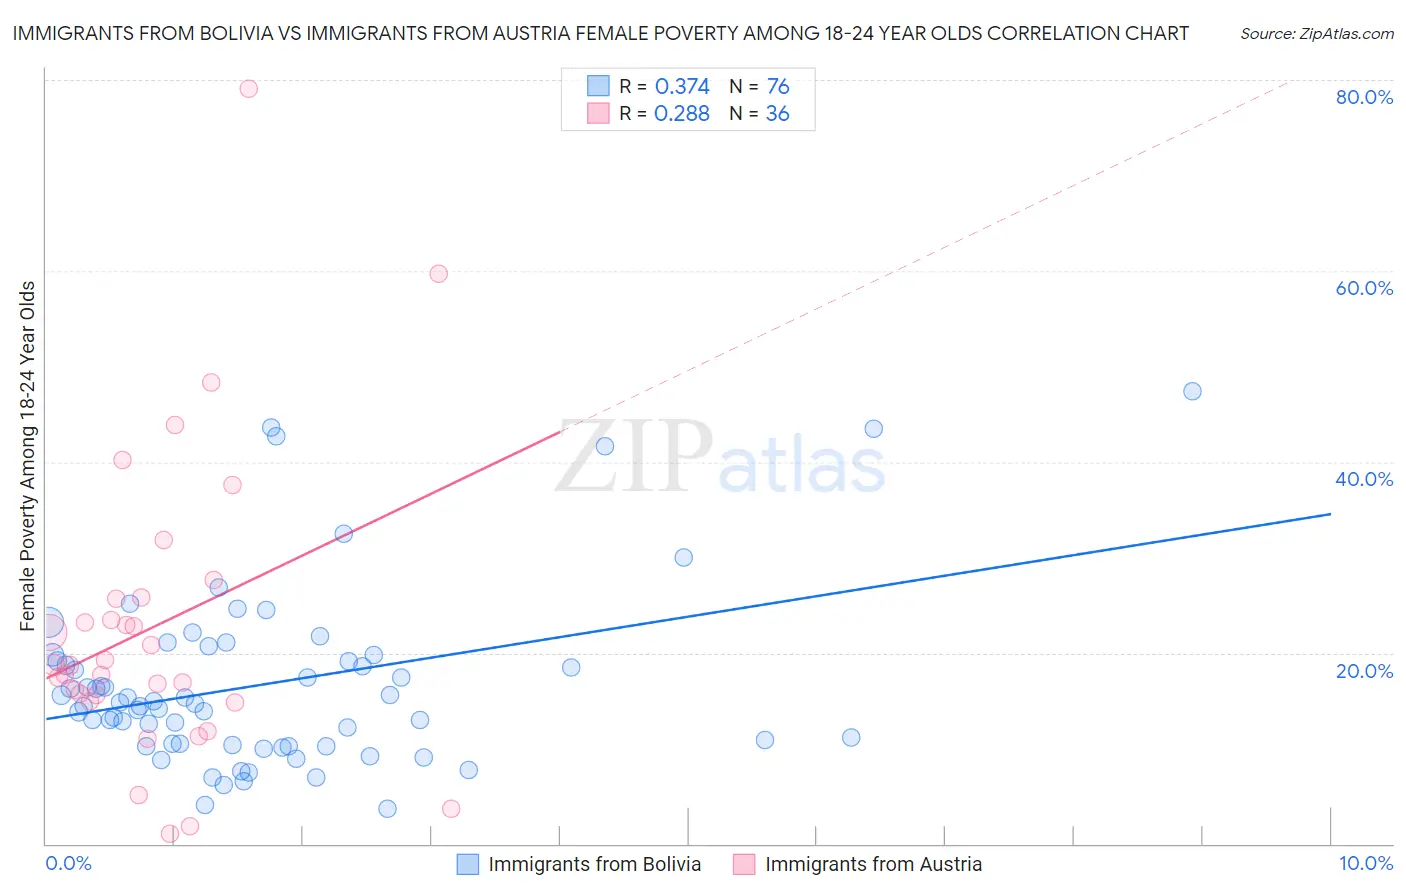 Immigrants from Bolivia vs Immigrants from Austria Female Poverty Among 18-24 Year Olds